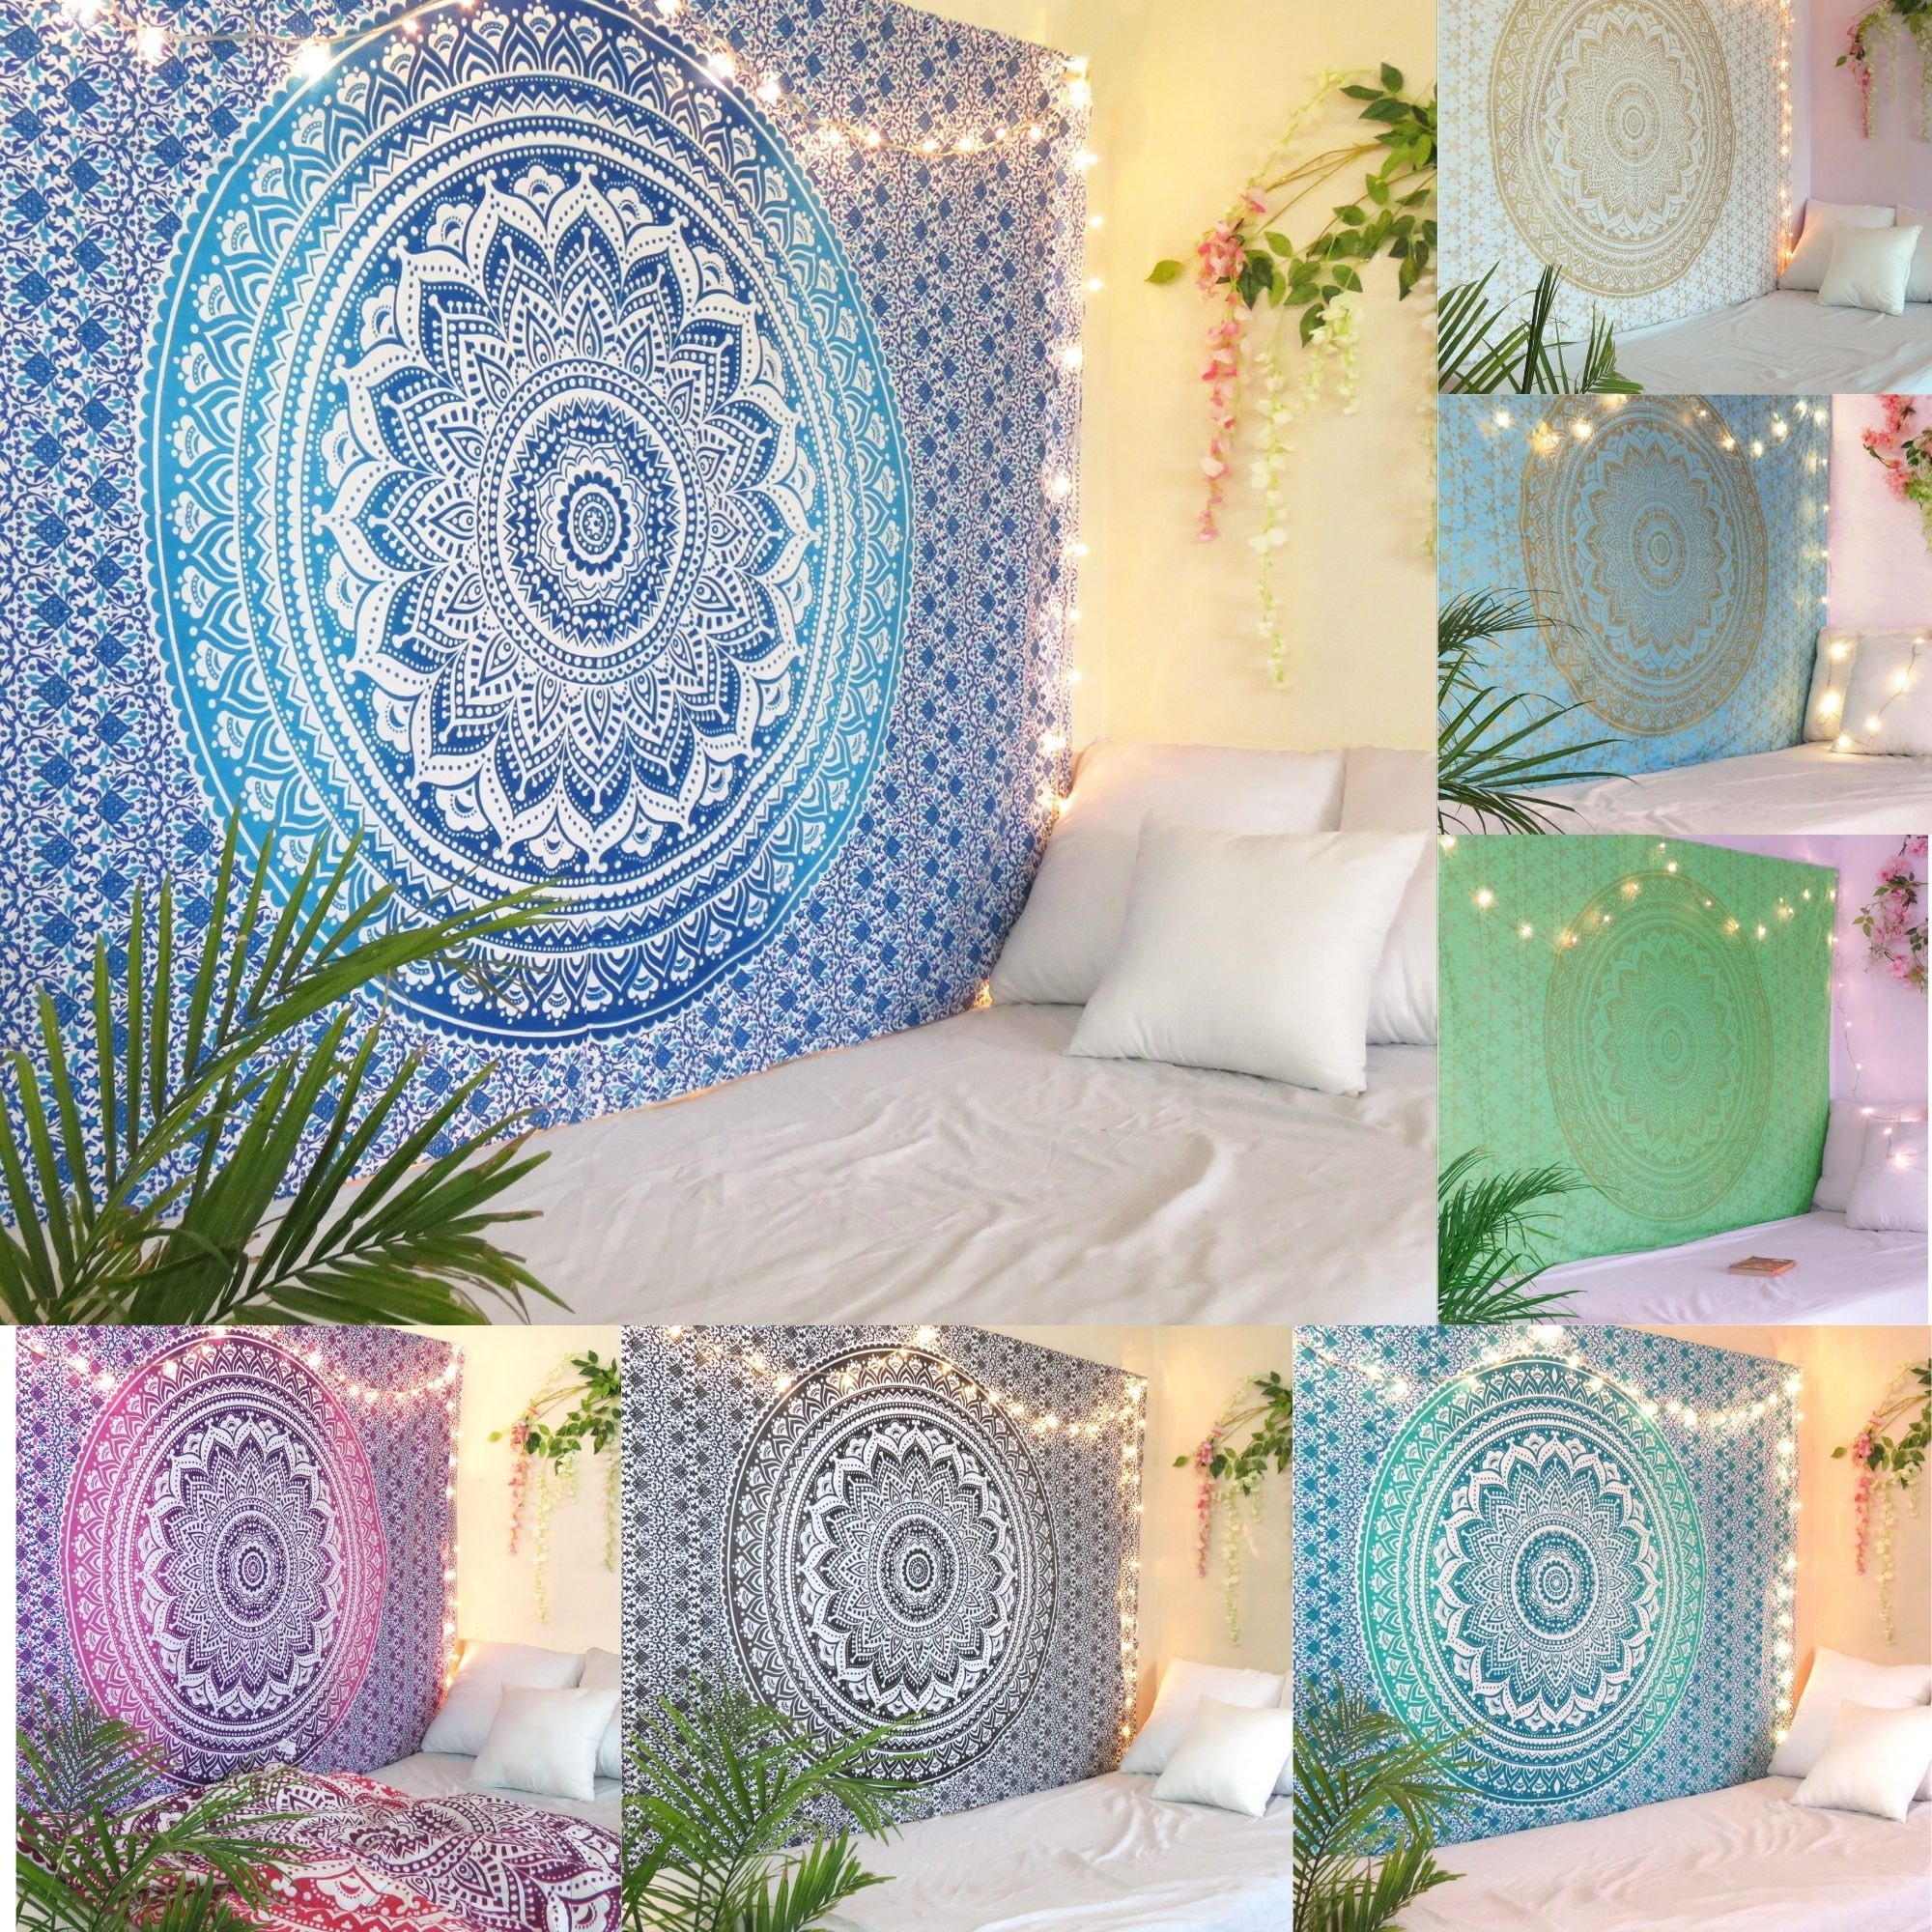 Hippie Scenery Tapestry Home Wall Hanging Colorful Mandala Tapestry Art Decor 